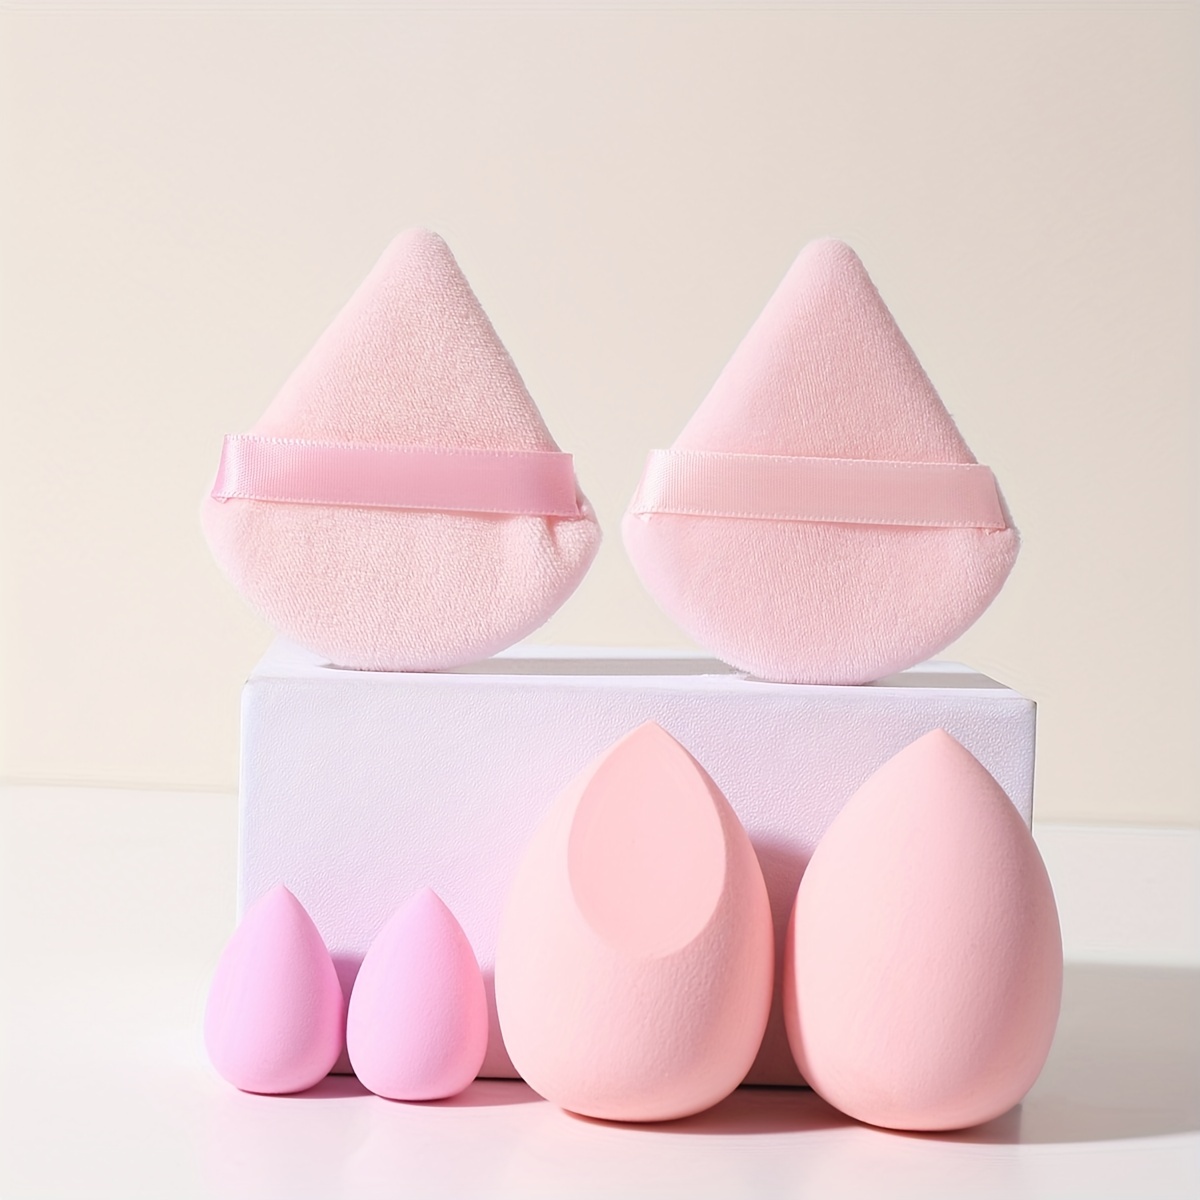 Artists Choice Artist's Choice Makeup Sponge Mini Applicator Wedges,  Triangle Cosmetic Sponges For Foundation, Blush, Eye